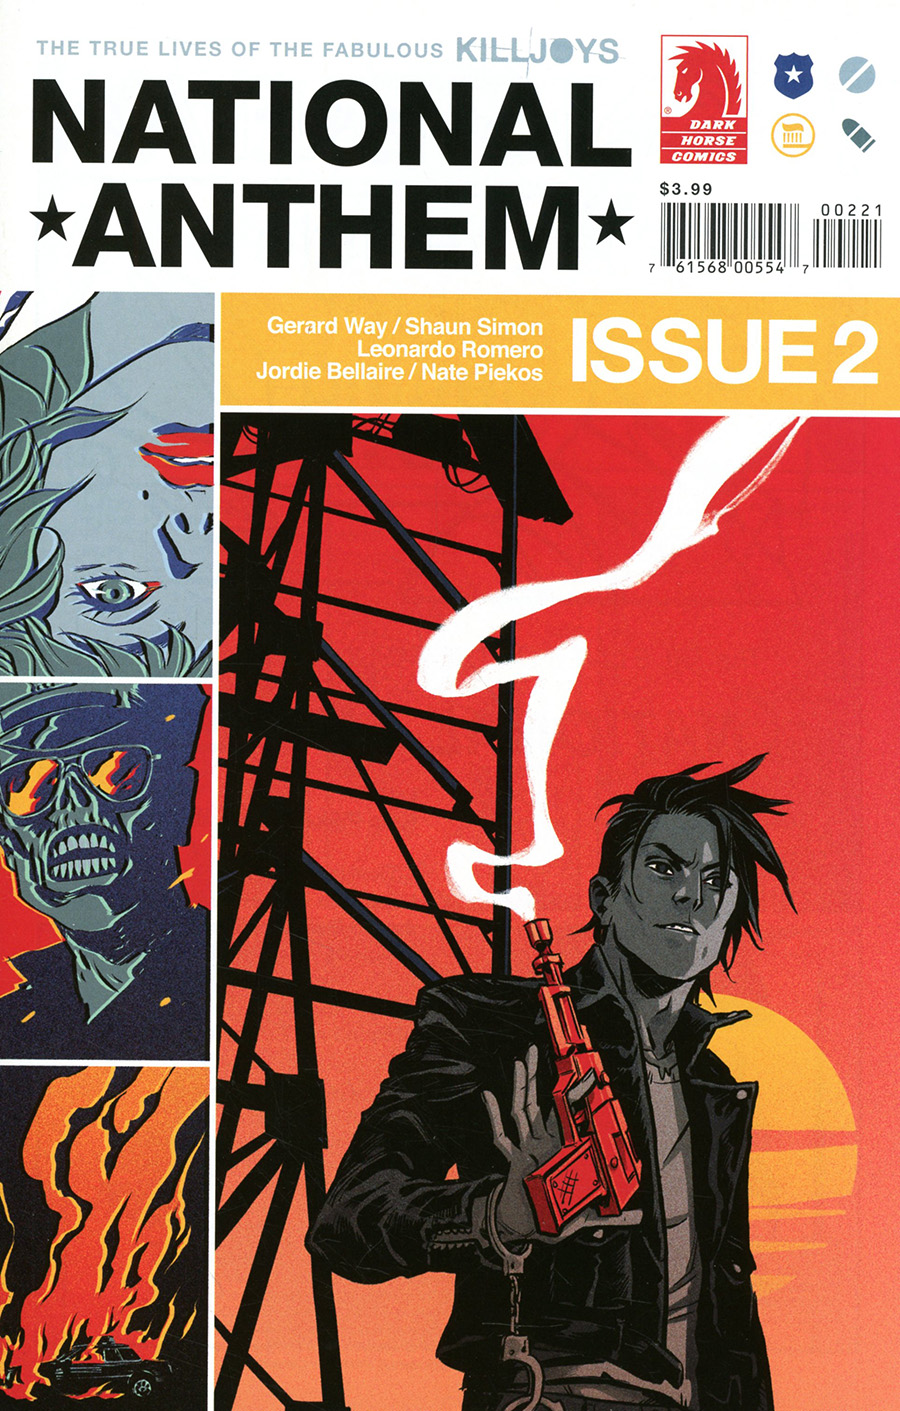 True Lives Of The Fabulous Killjoys National Anthem #2 Cover B Variant Becky Cloonan Cover